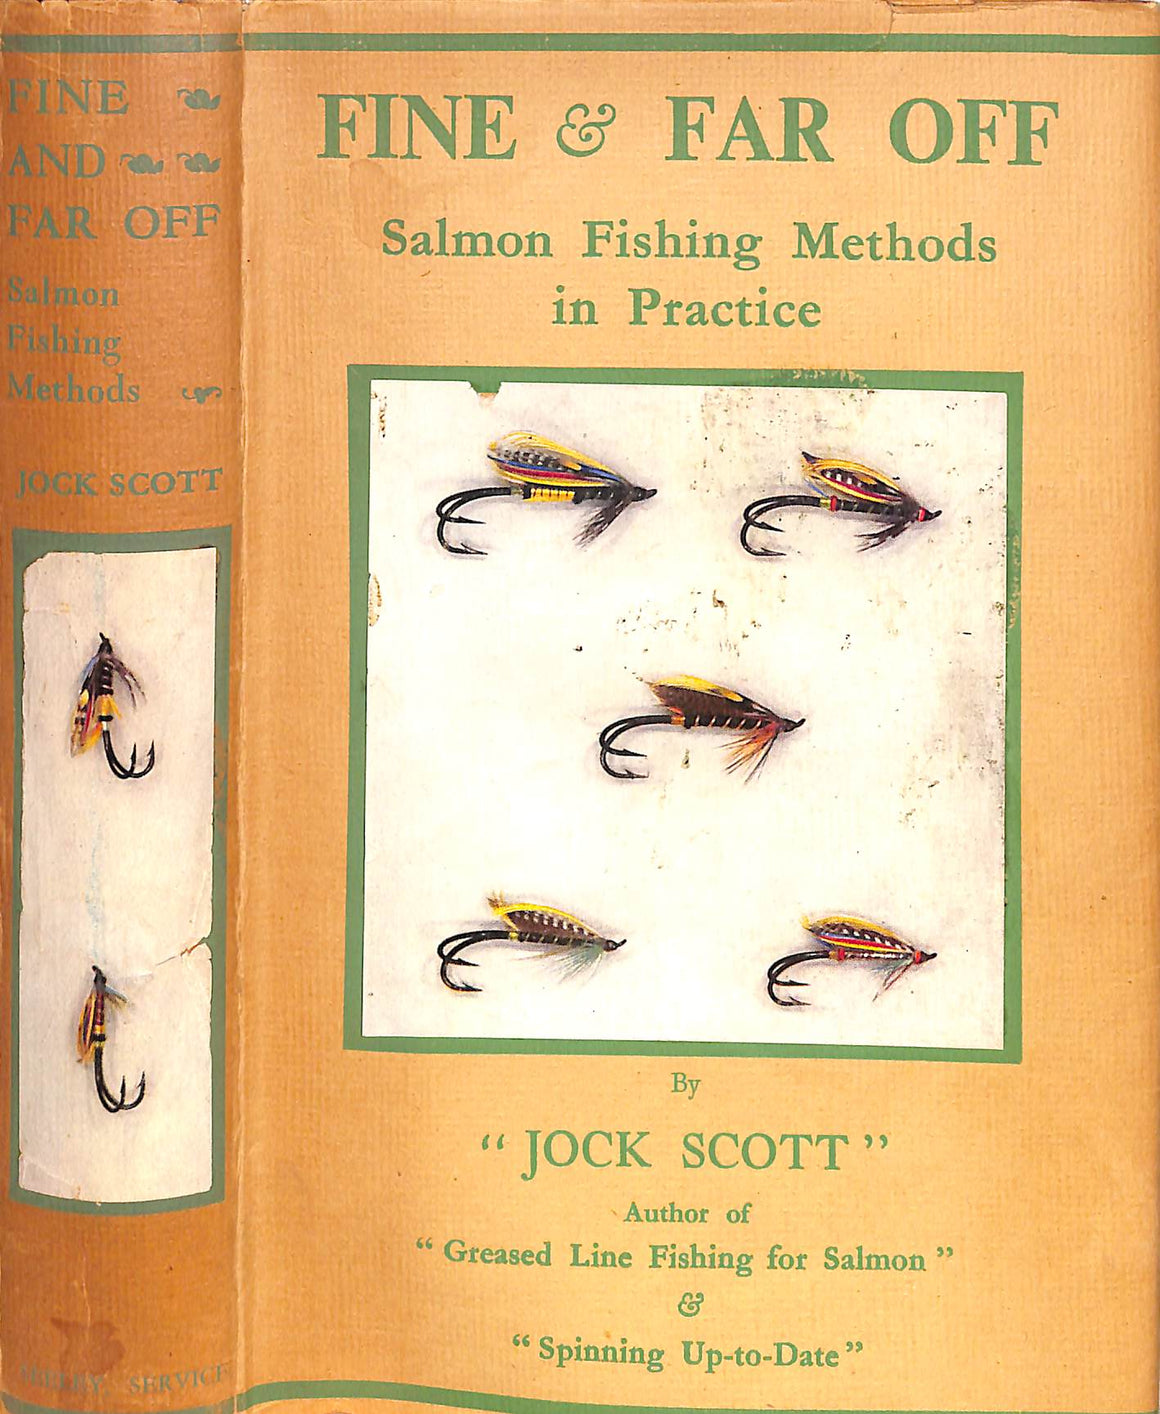 Four Vintage Fly Fishing Books (Lot 30 - Single-Owner Antique Sporting  CollectionSep 30, 2015, 6:00pm)